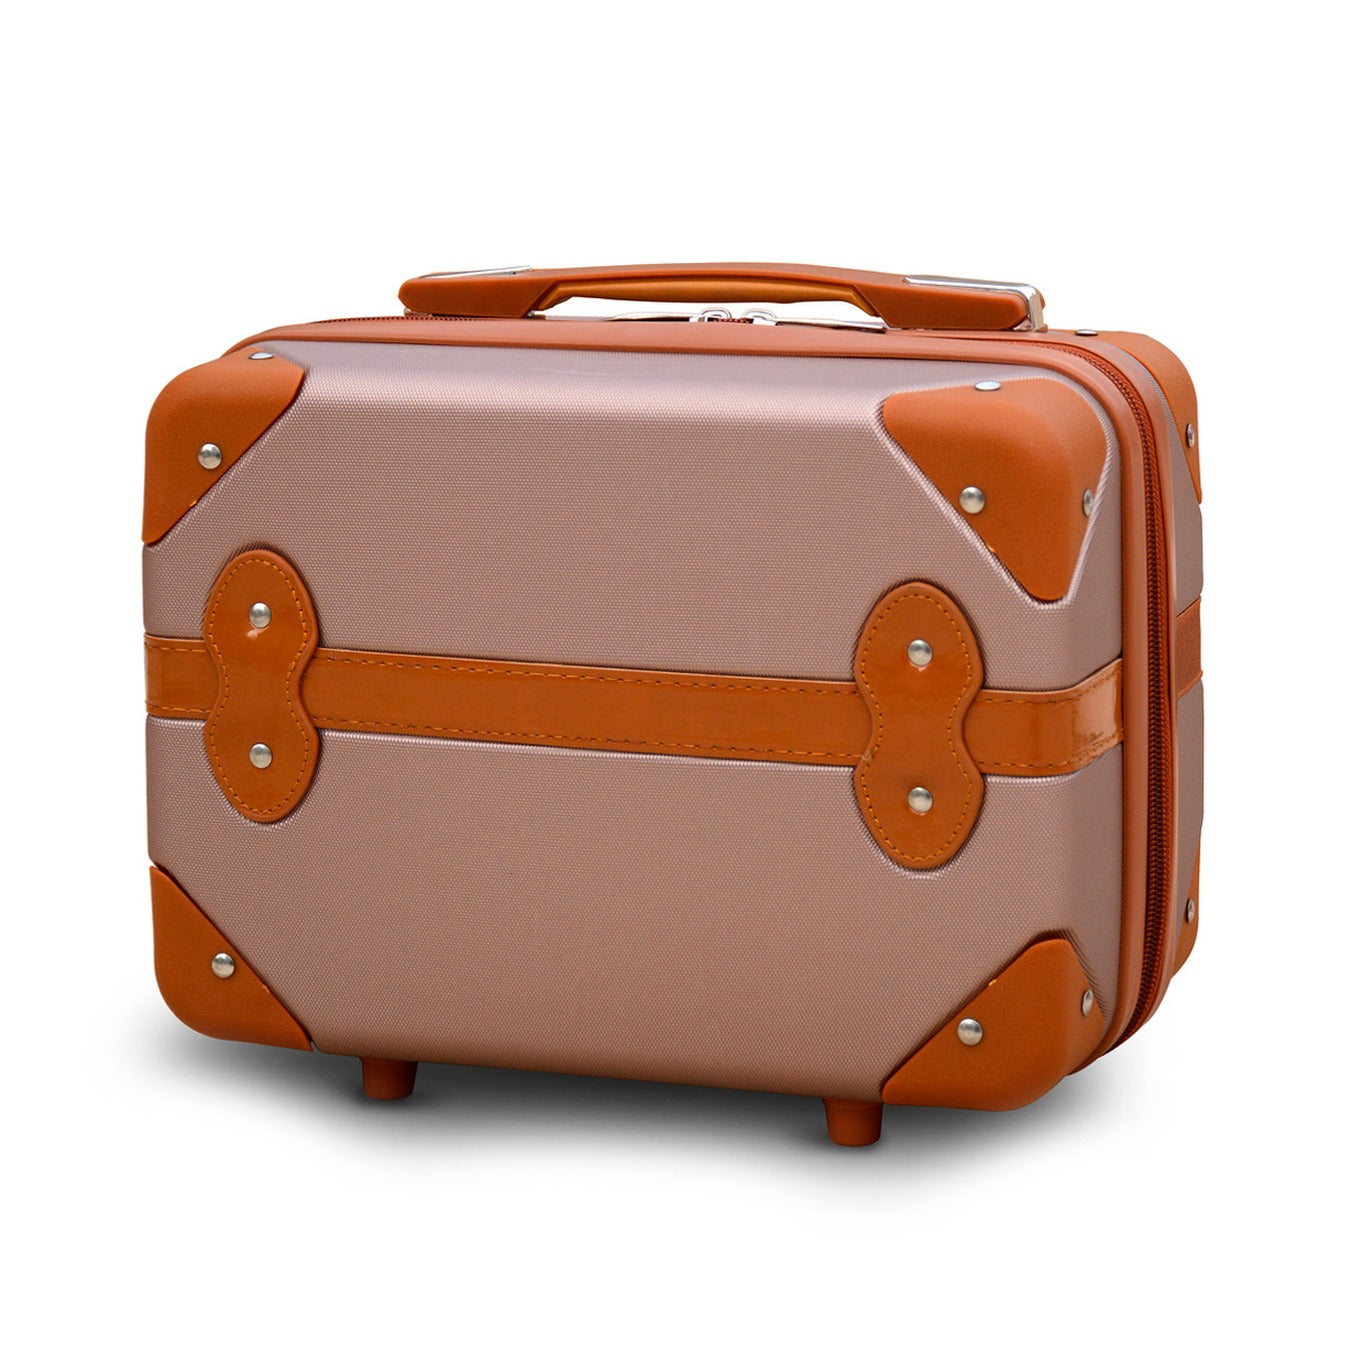 4 Piece Full Set 7” 20” 24” 28 inches Rose Gold Colour Corner Guard ABS Luggage With Spinner Wheel